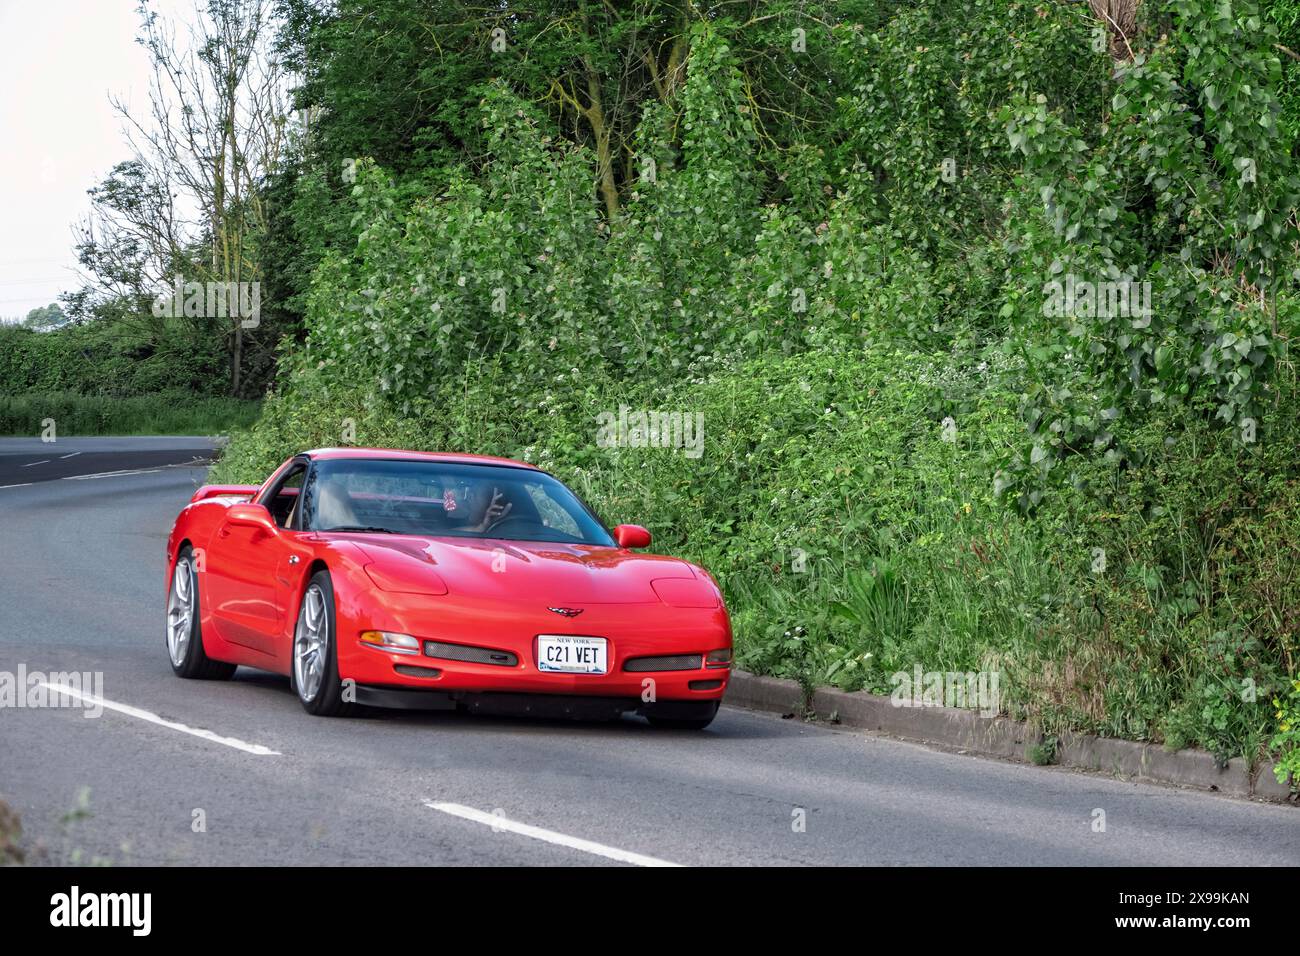 2020 Chevrolet Corvette C21 driving on a country road Stock Photo